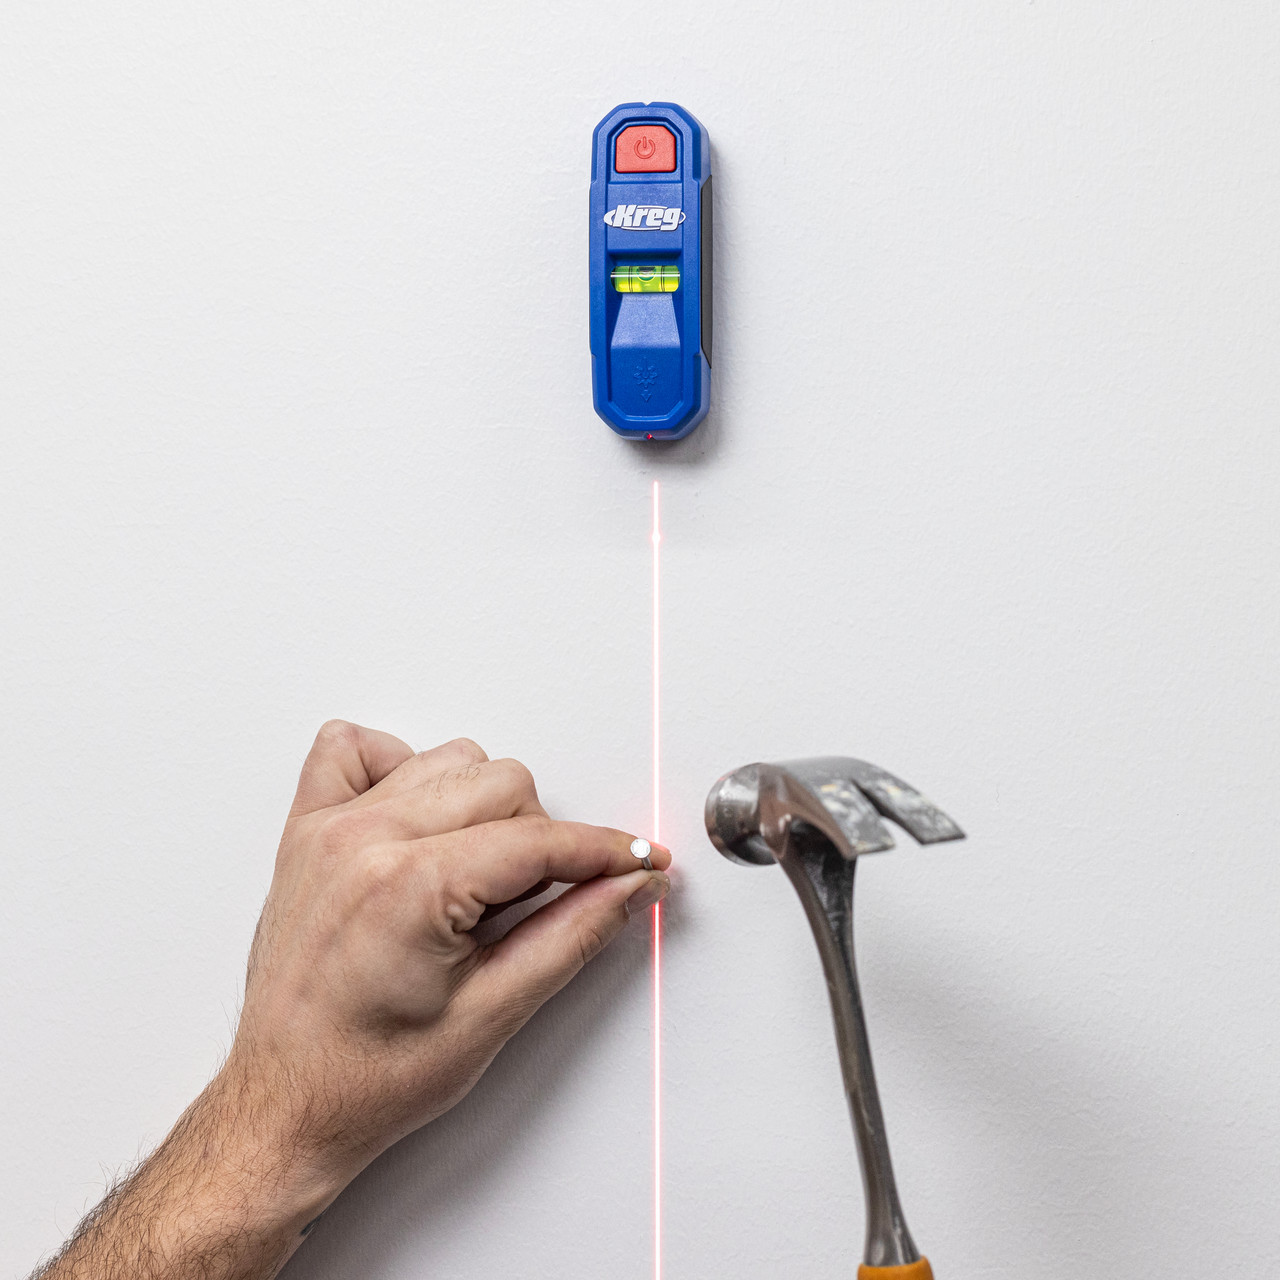 Kreg's new laser mark and regular stud finder are now available! 